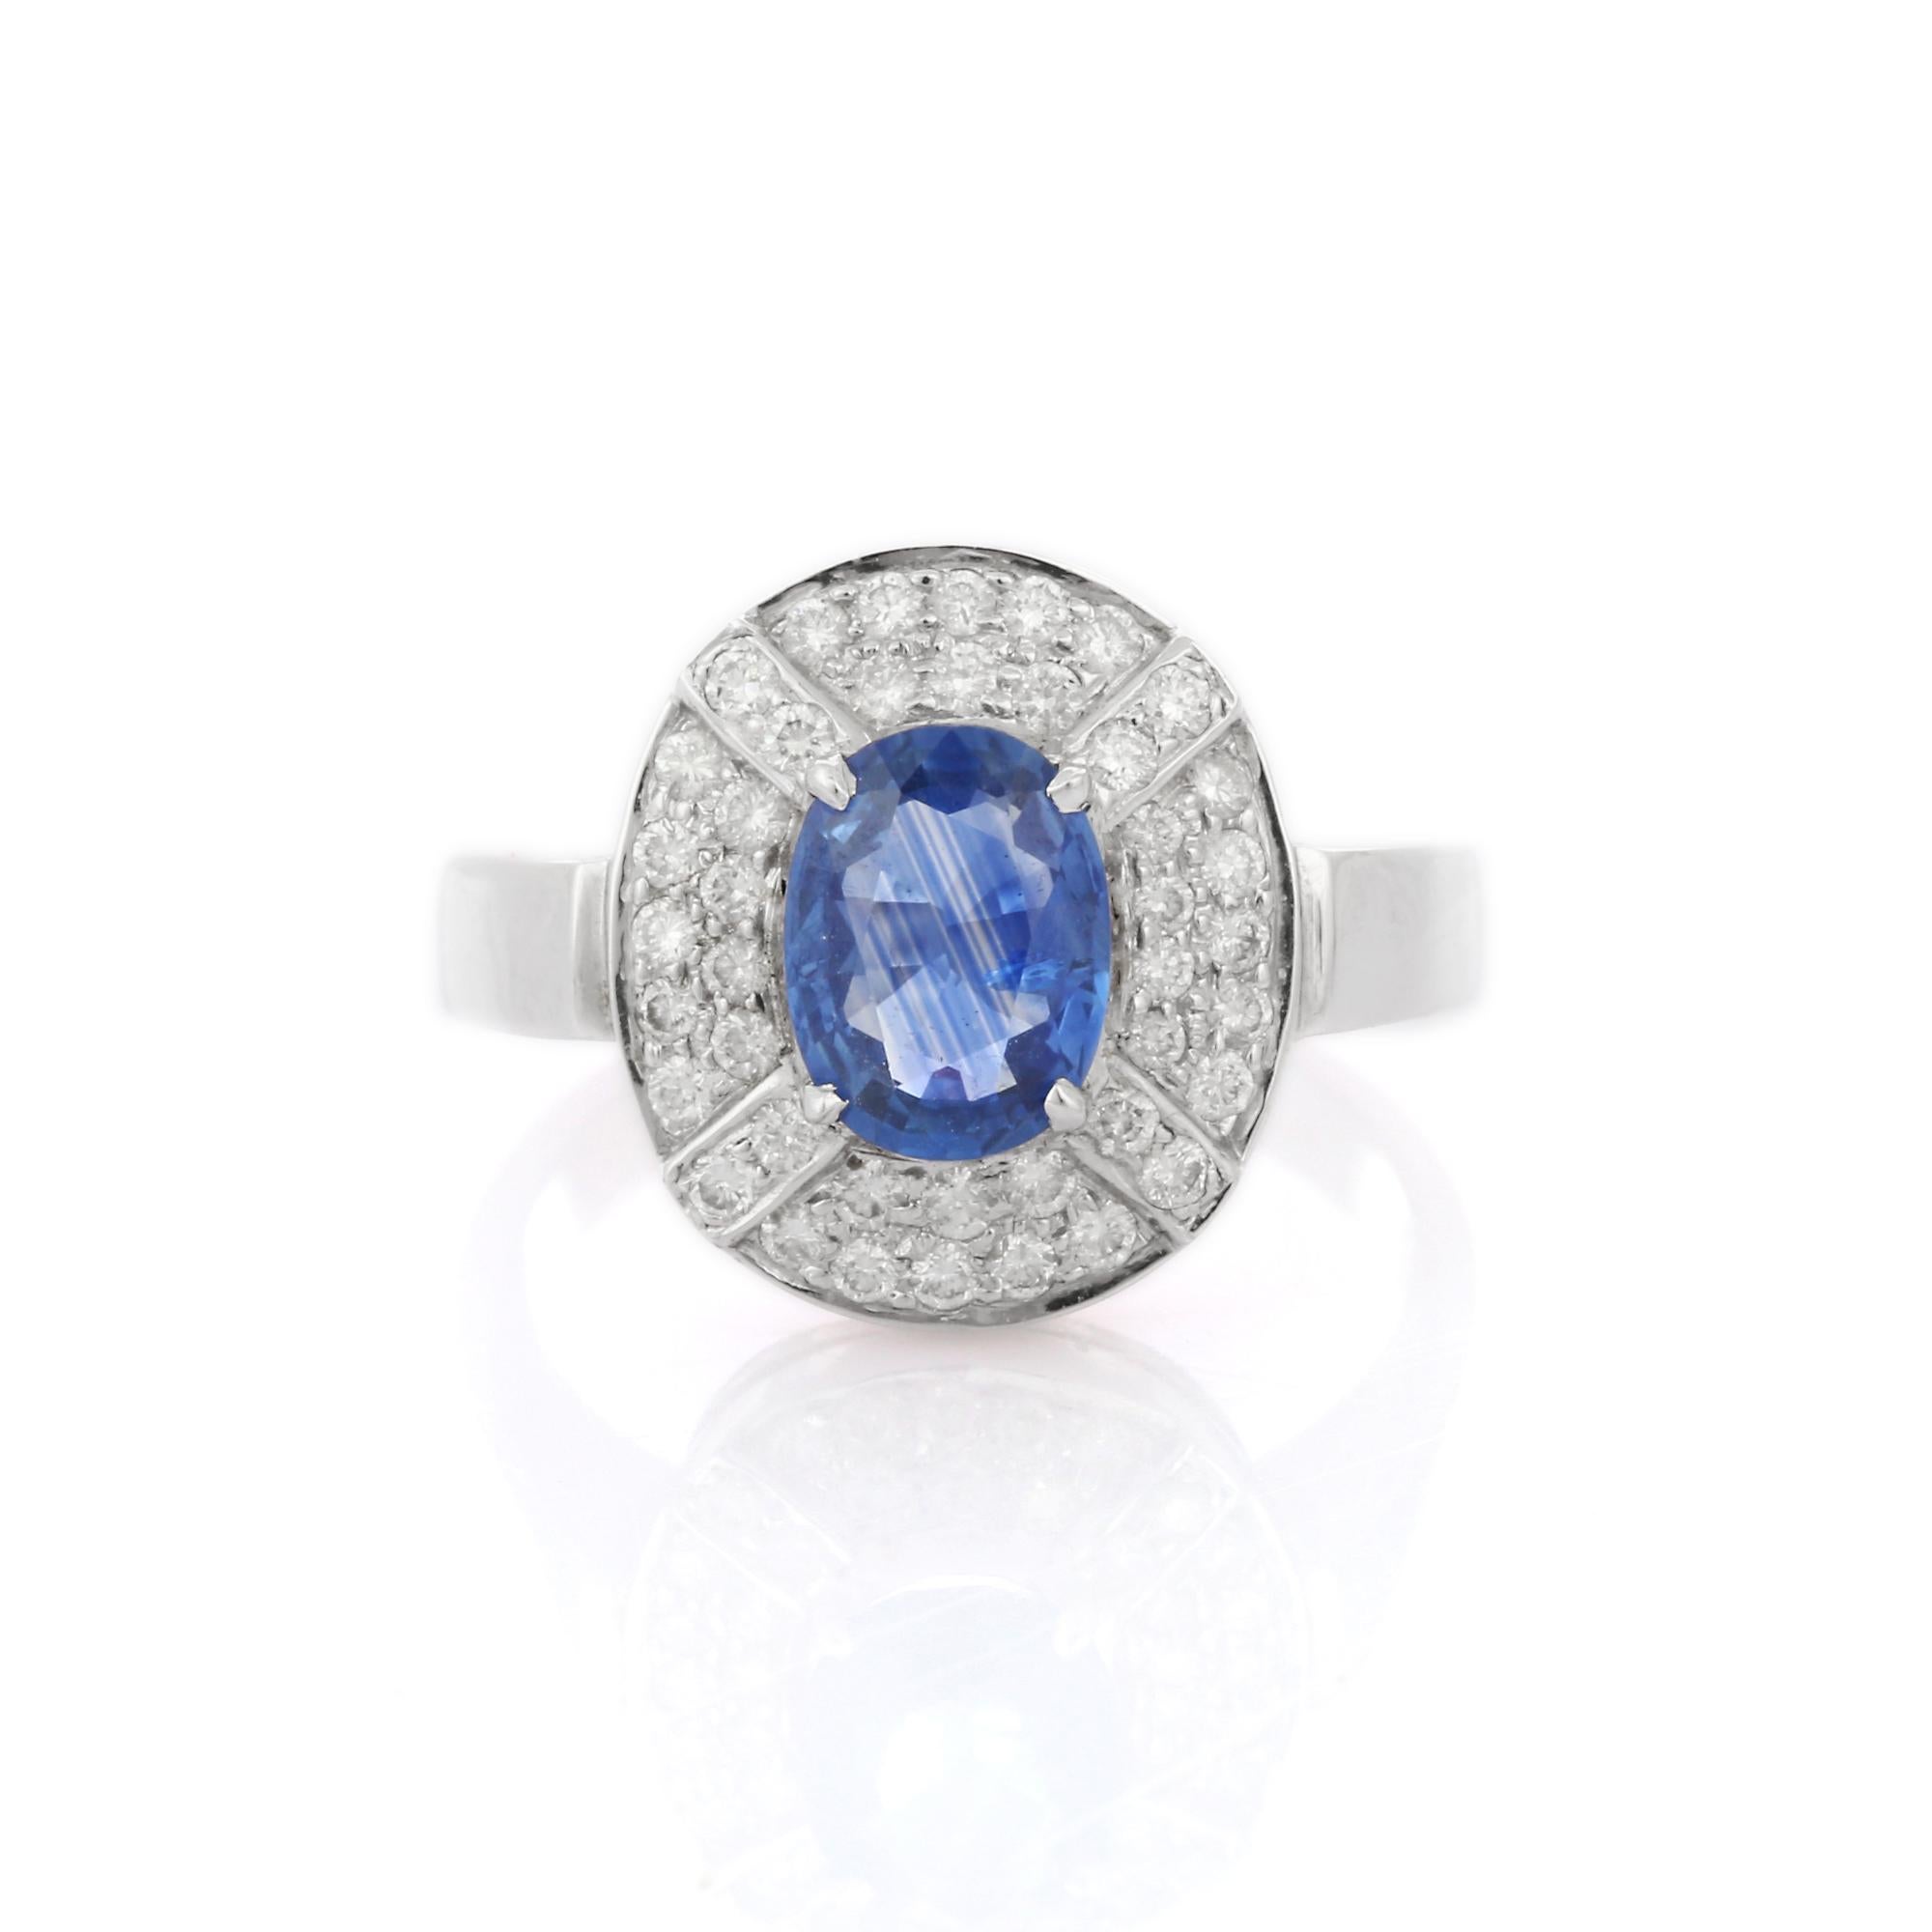 For Sale:  Art Deco Style 1.44 Ct Blue Sapphire Diamond Wedding Ring in 18K White Gold 5